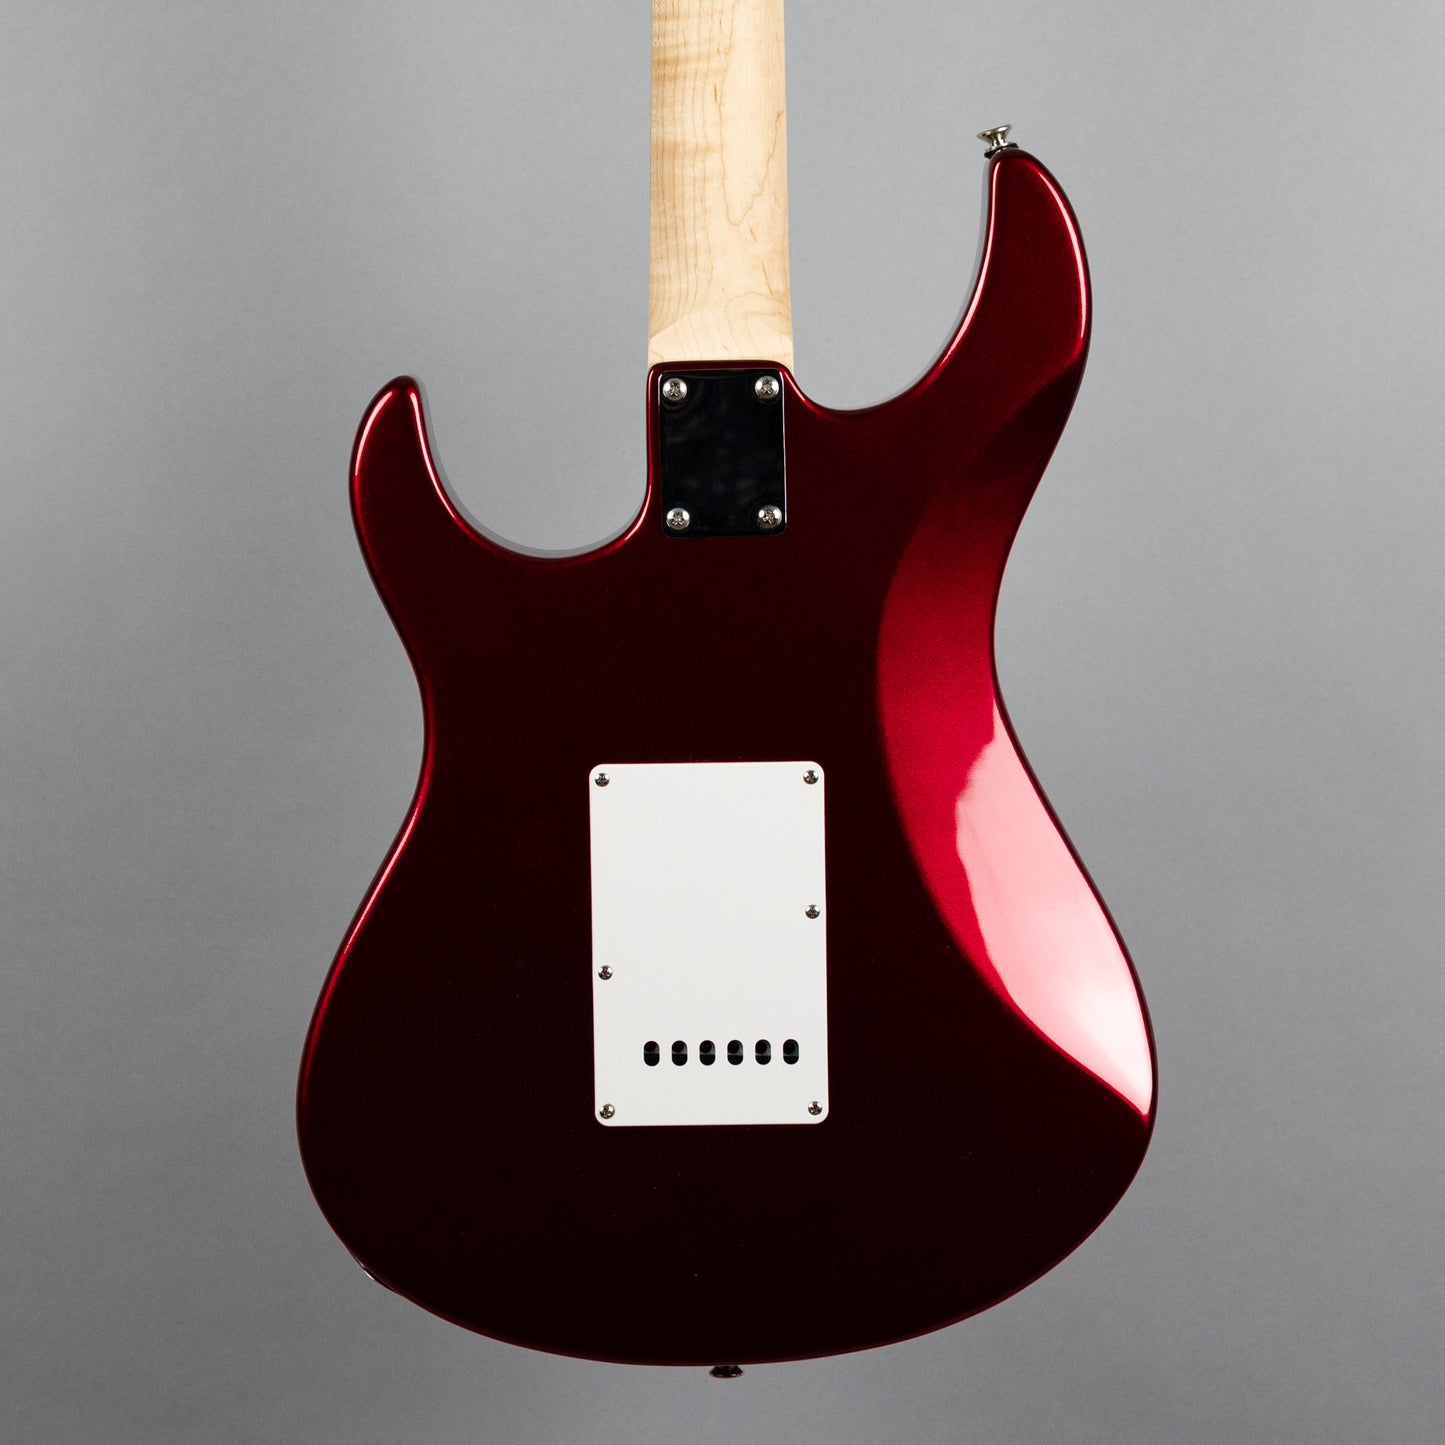 Yamaha PAC012 Pacifica Electric Guitar in Red Metallic